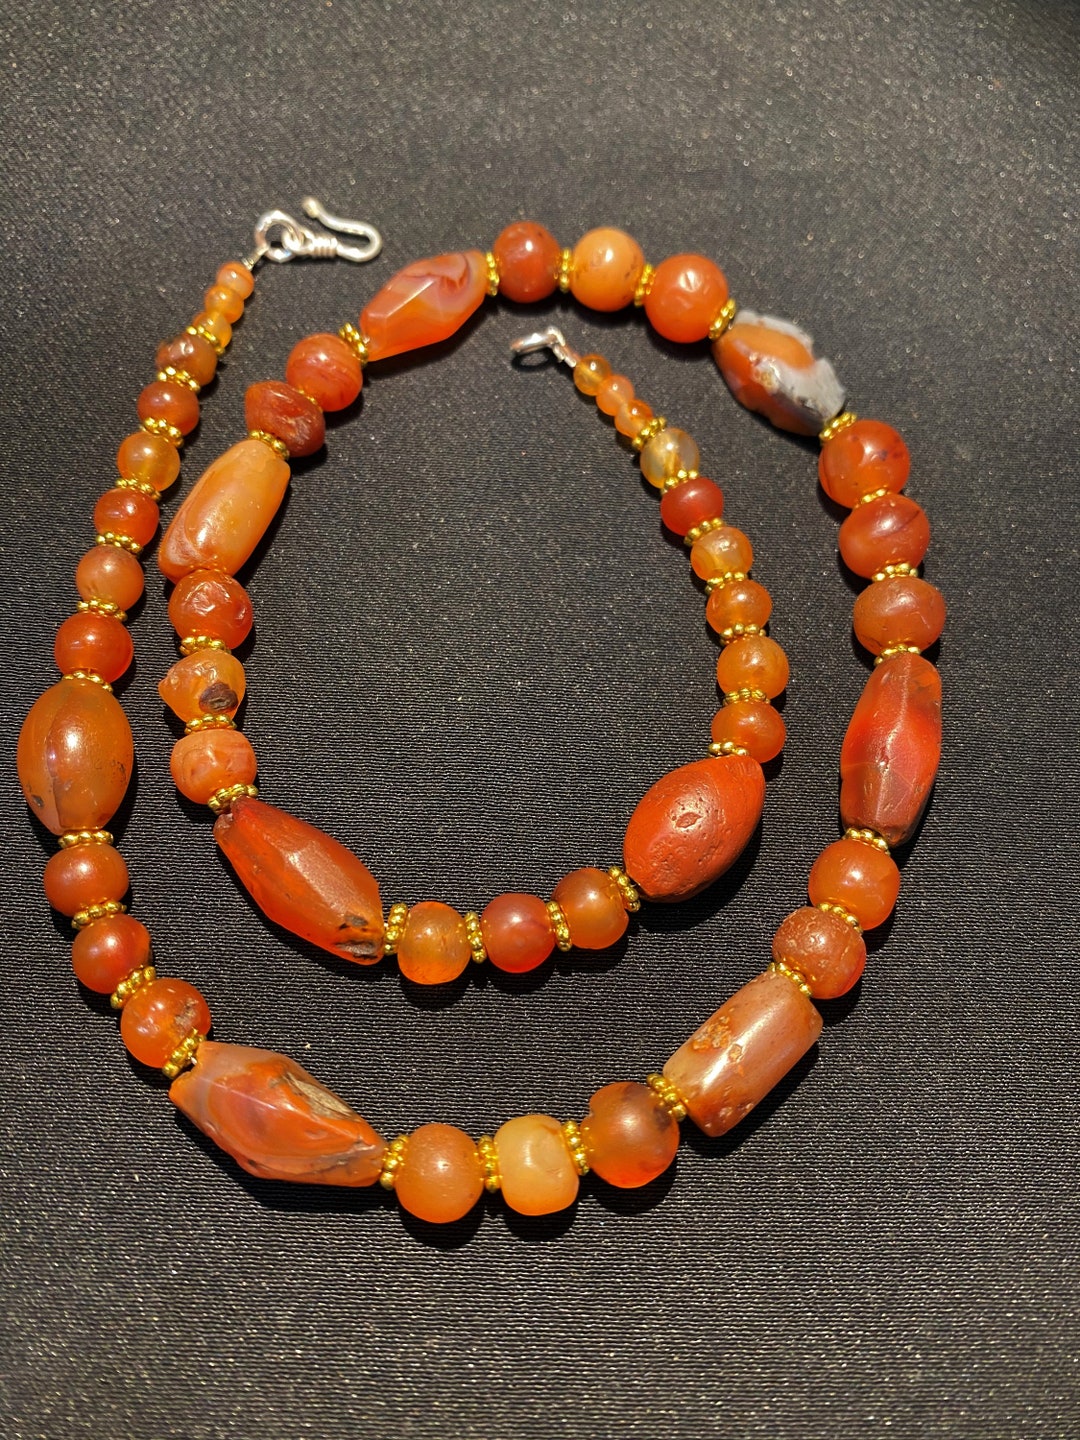 Old Beads Himalayan Old Ancient Antique Carnelian Agate Mala Necklace ...